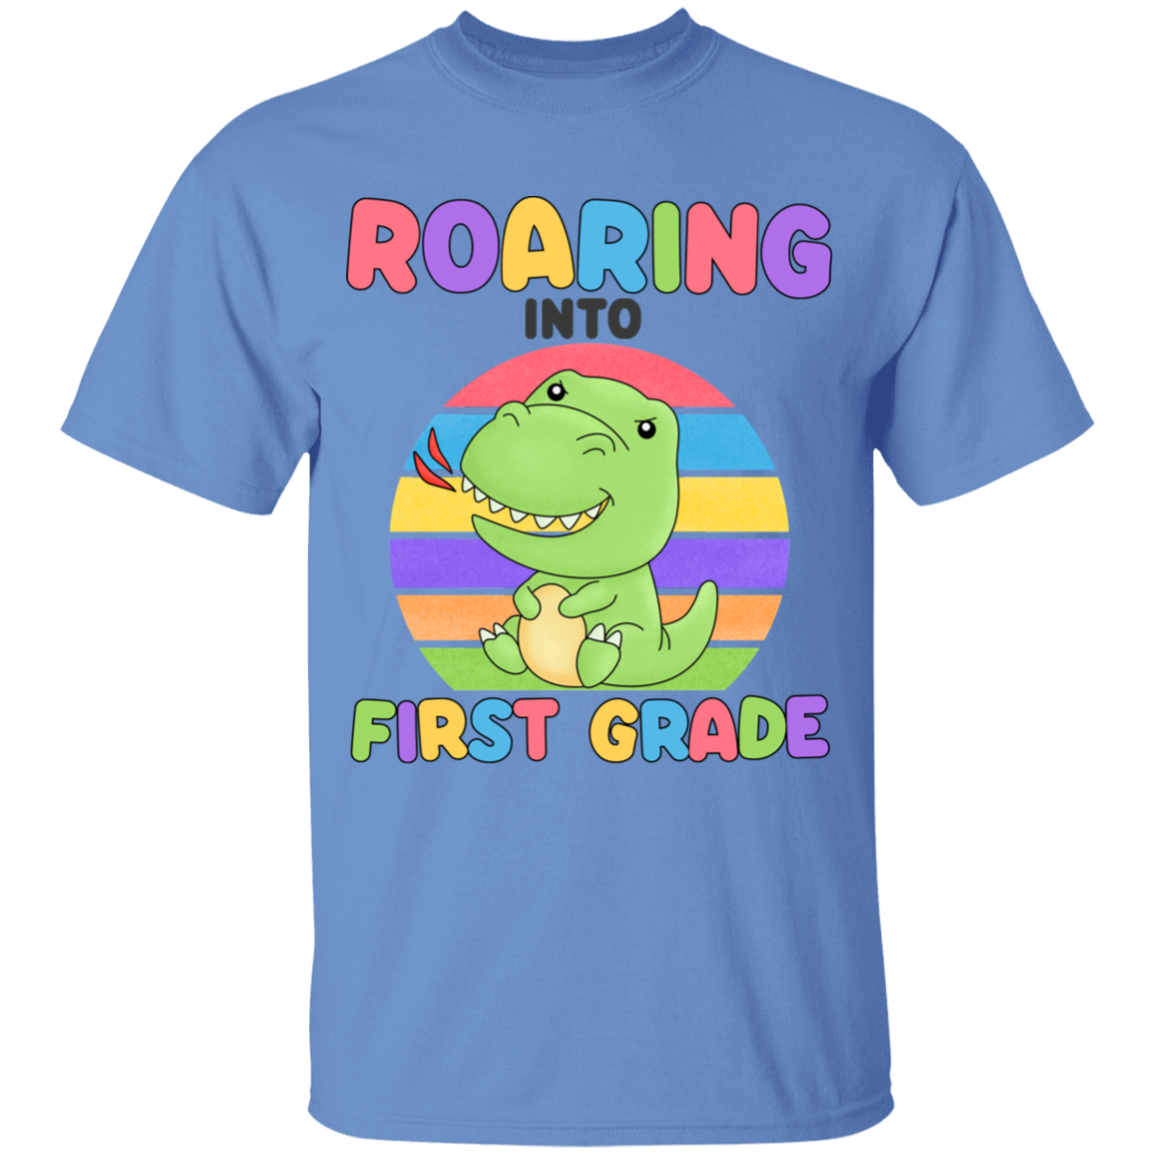 Roaring Into First Grade Youth Cotton T-Shirt